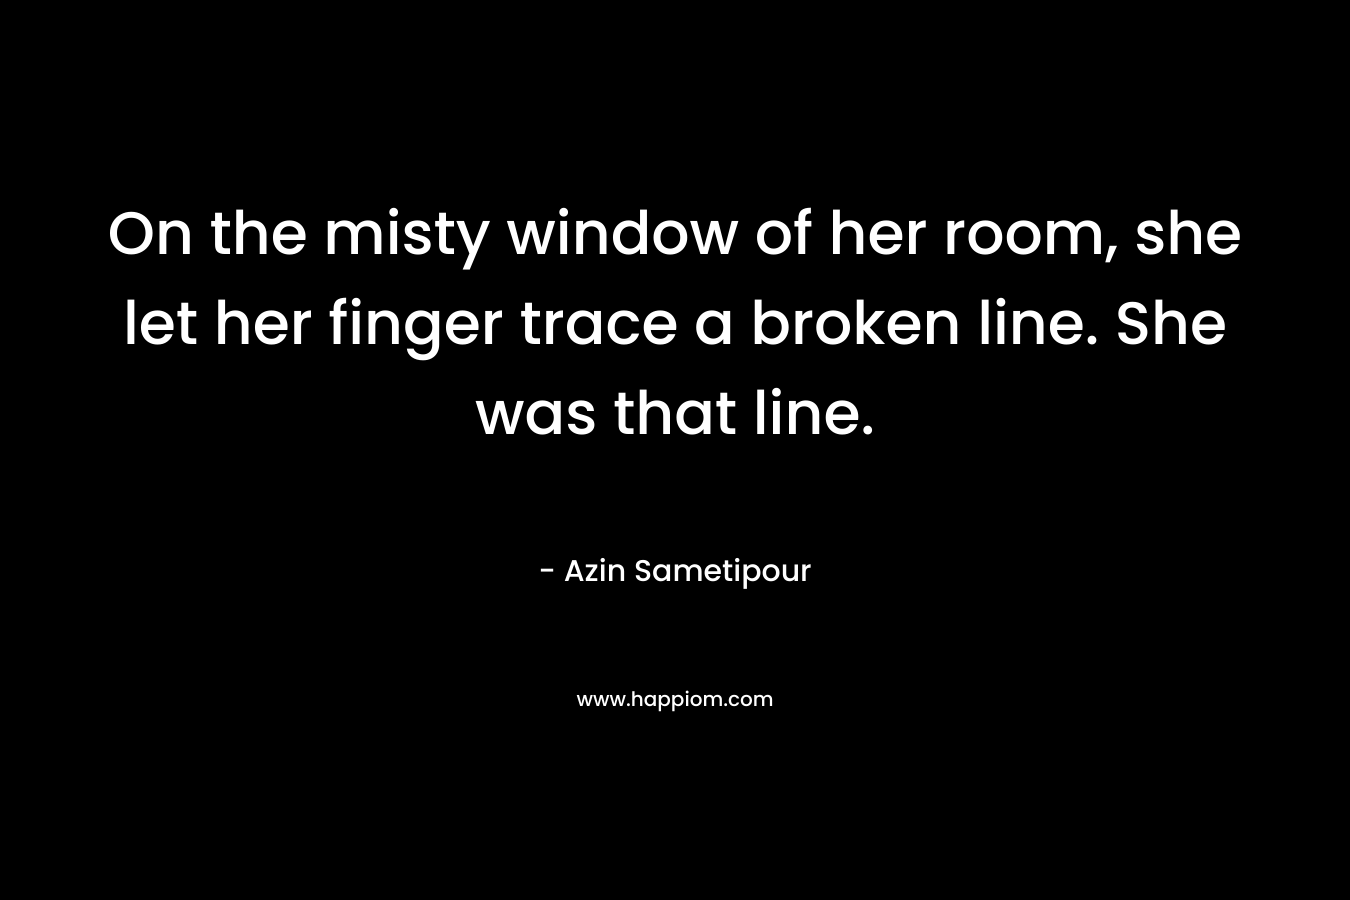 On the misty window of her room, she let her finger trace a broken line. She was that line.